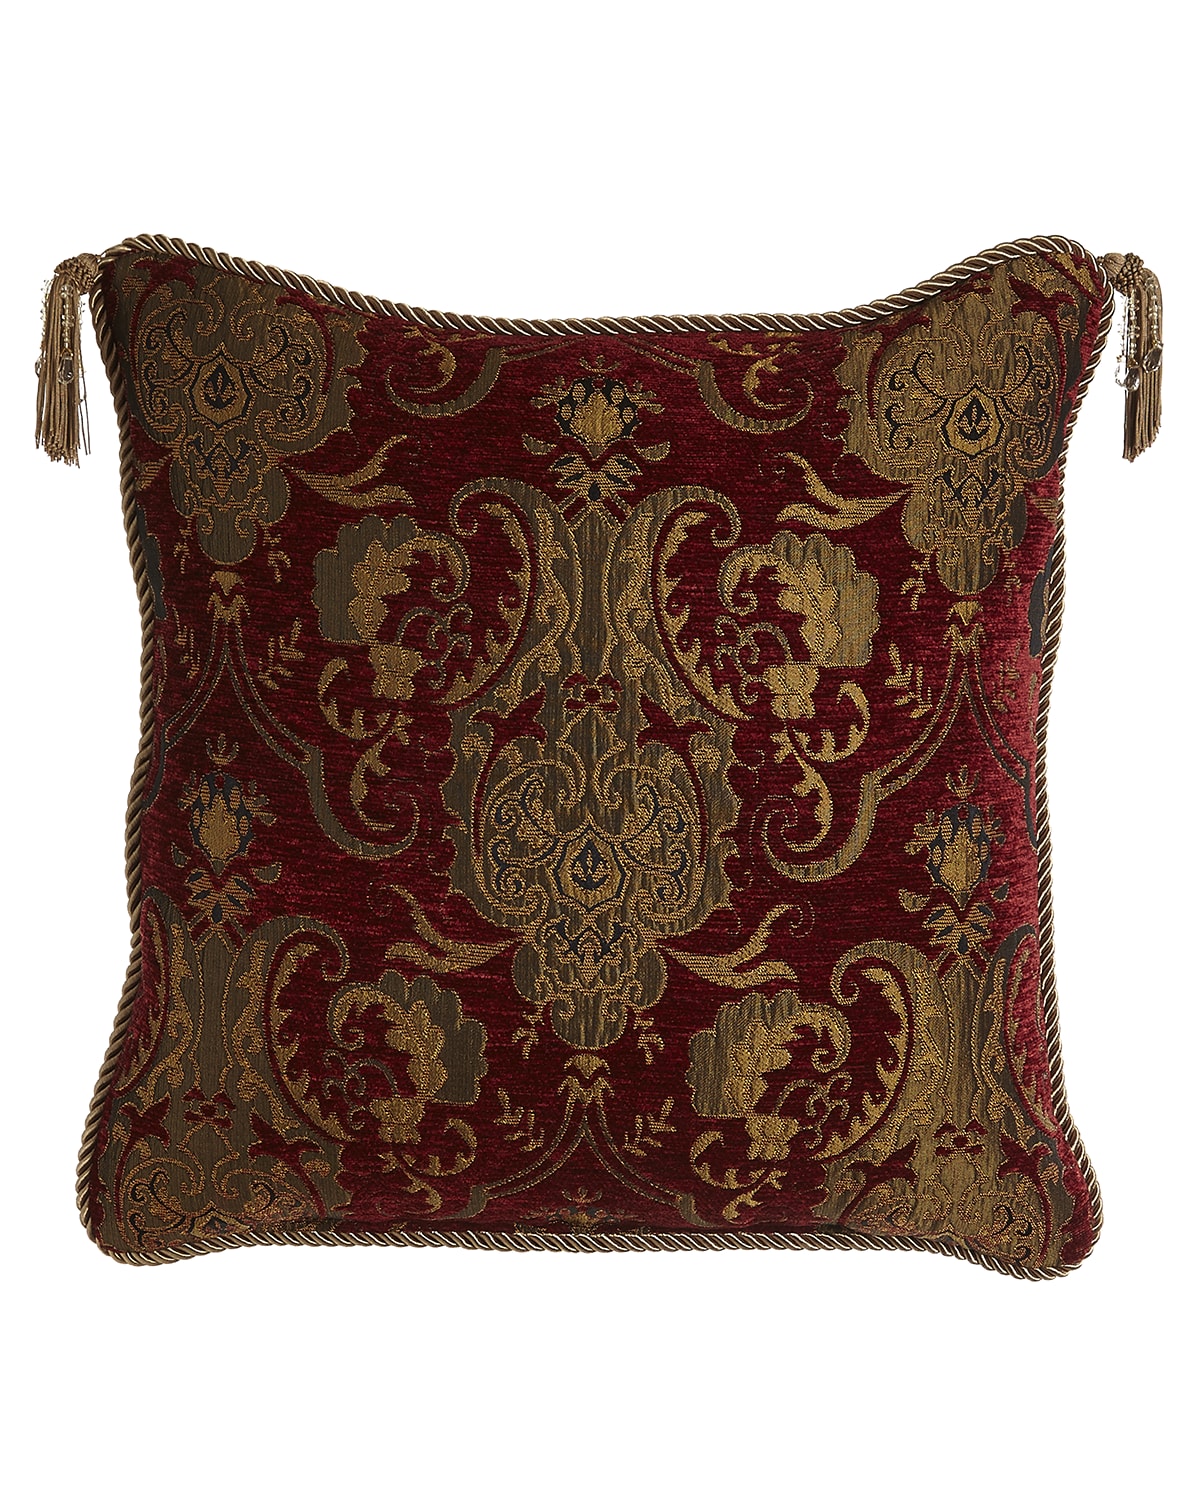 Image Austin Horn Collection Scarlet Reversible Pillow with Two Beaded Tassels, 20"Sq.